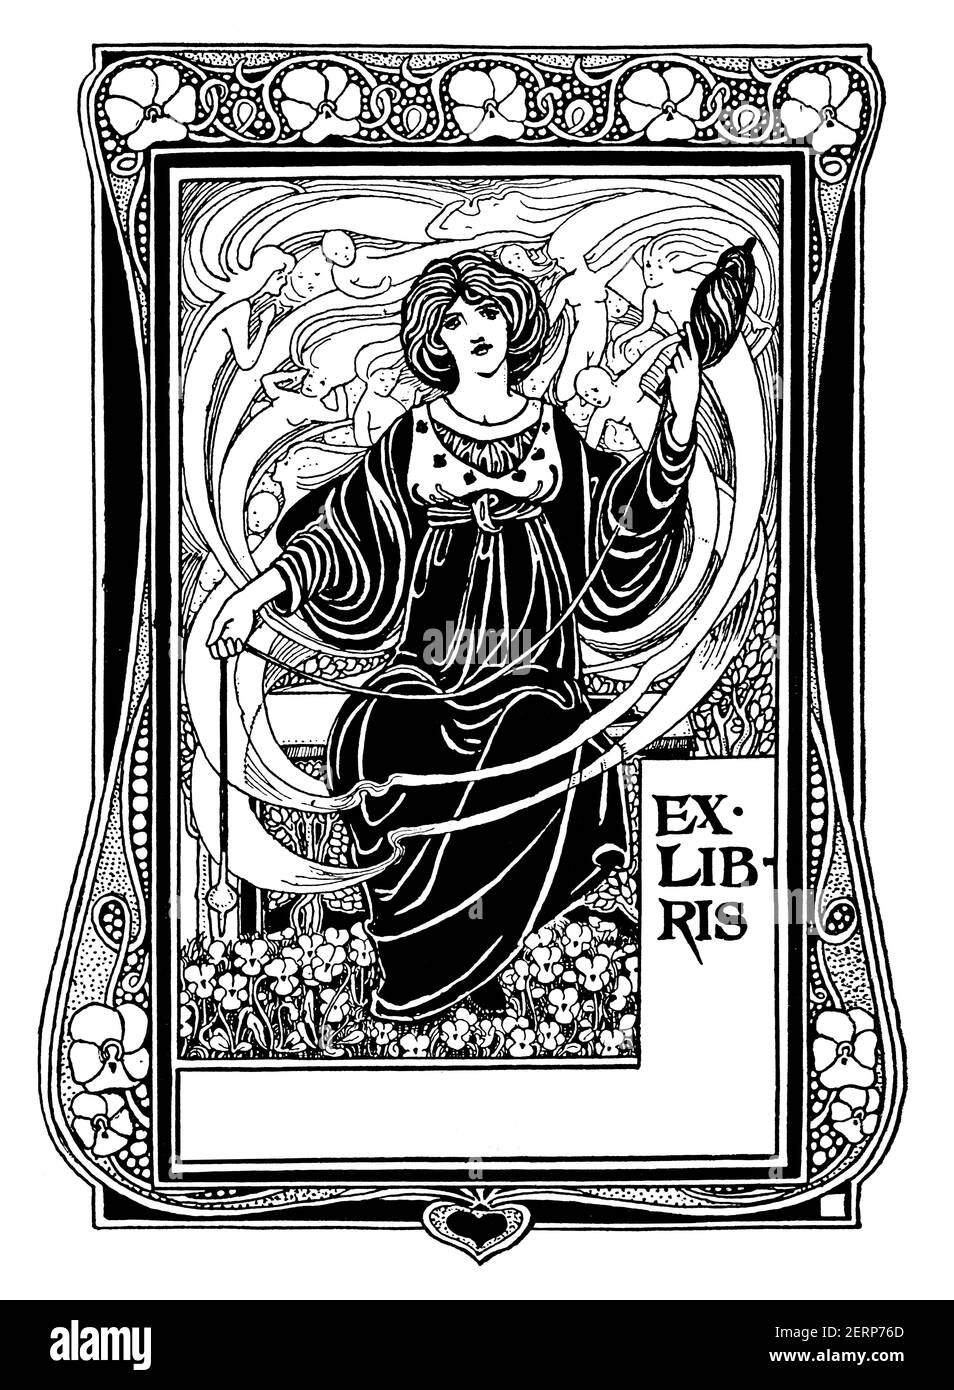 Blank bookplate depicting female figure spinning yarn by British children's book illustrator and designer Ethel Larcombe of Exeter, from 1900 The Stud Stock Photo